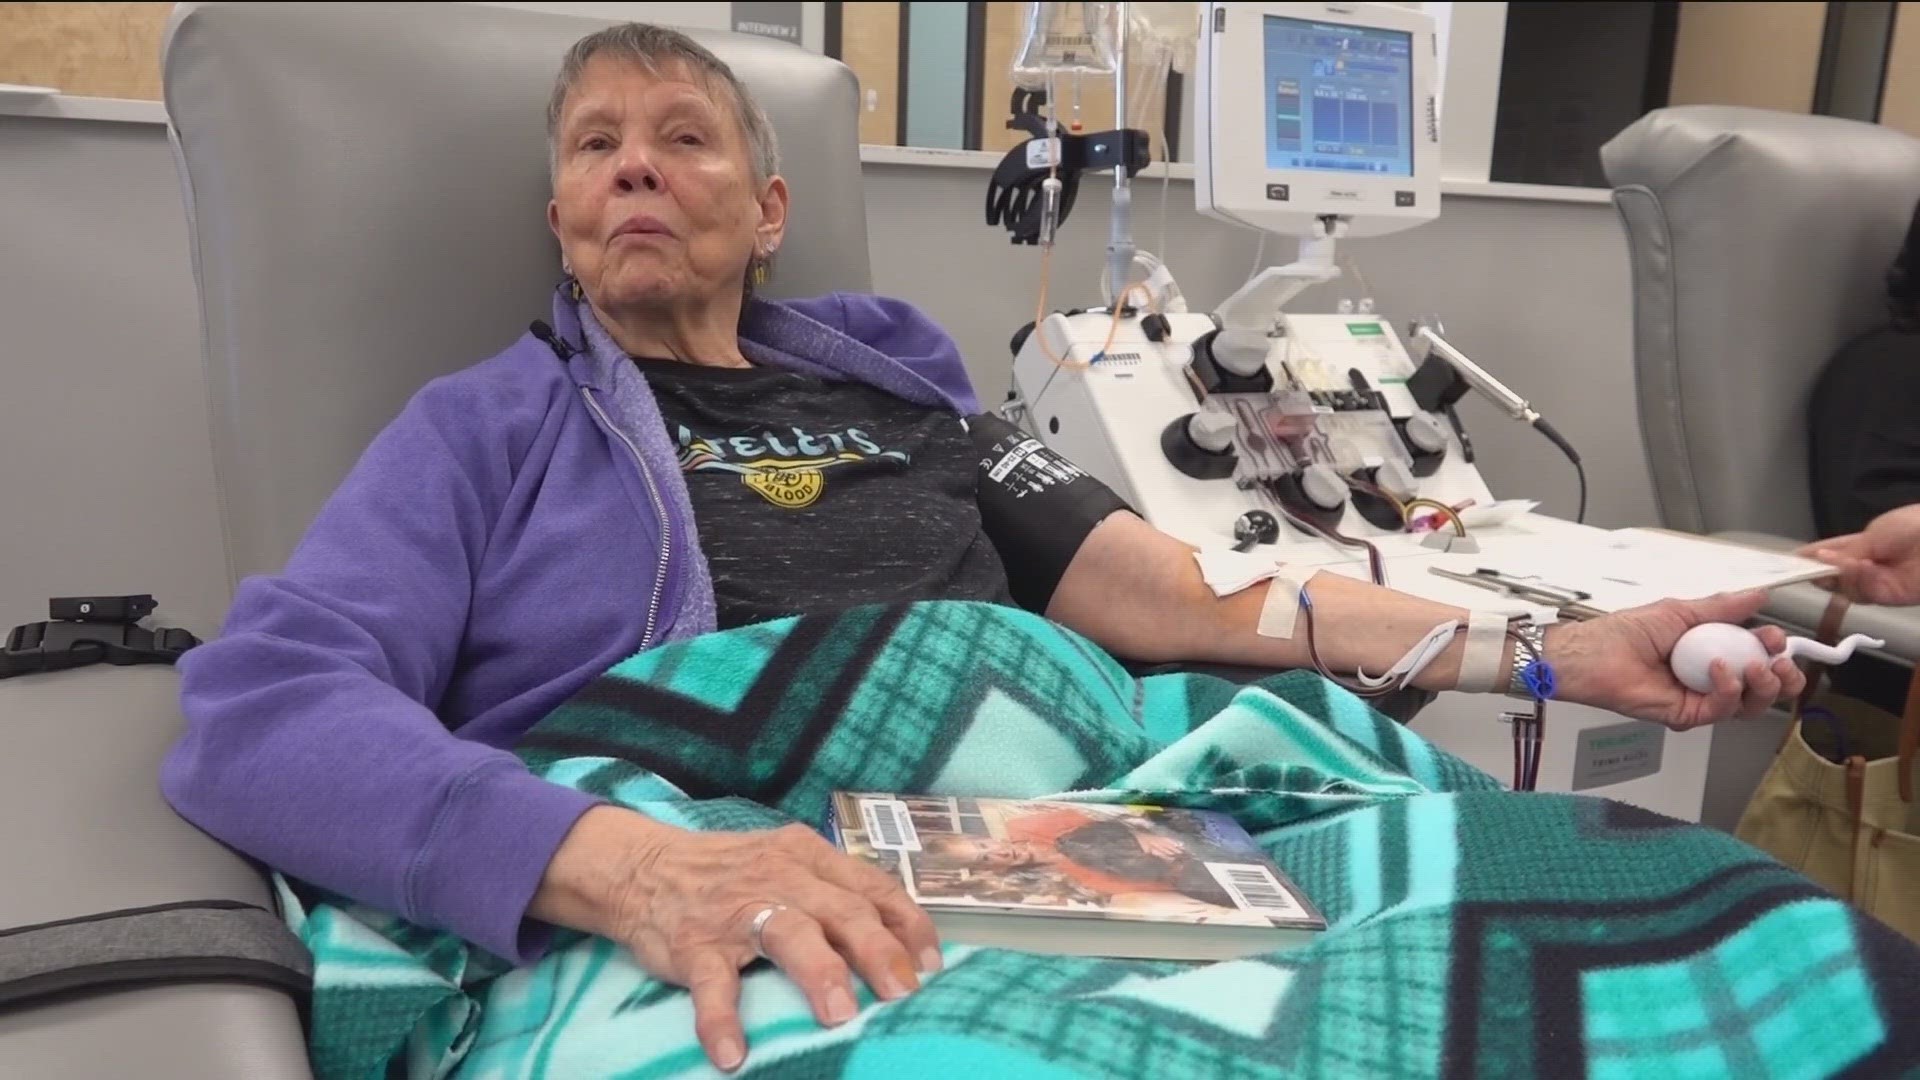 Kathy Petheram has been giving blood and platelets for 23 years. She comes in about once every other week.